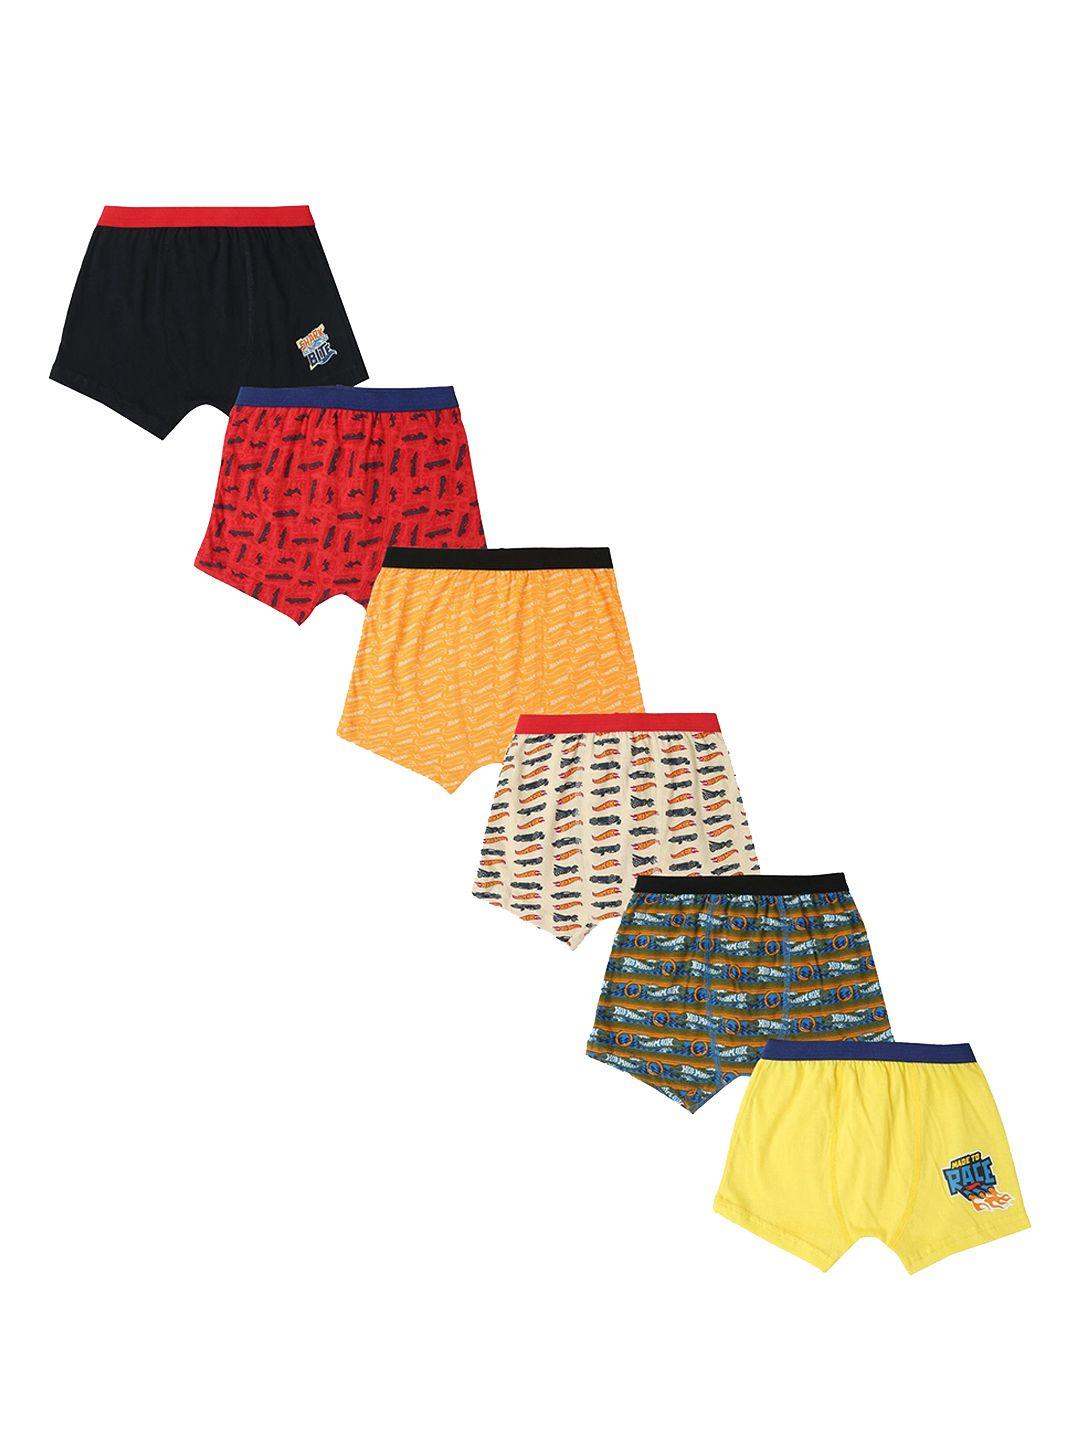 red rose boys pack of 6 hot wheels printed cotton boxer briefs jnr-510po6